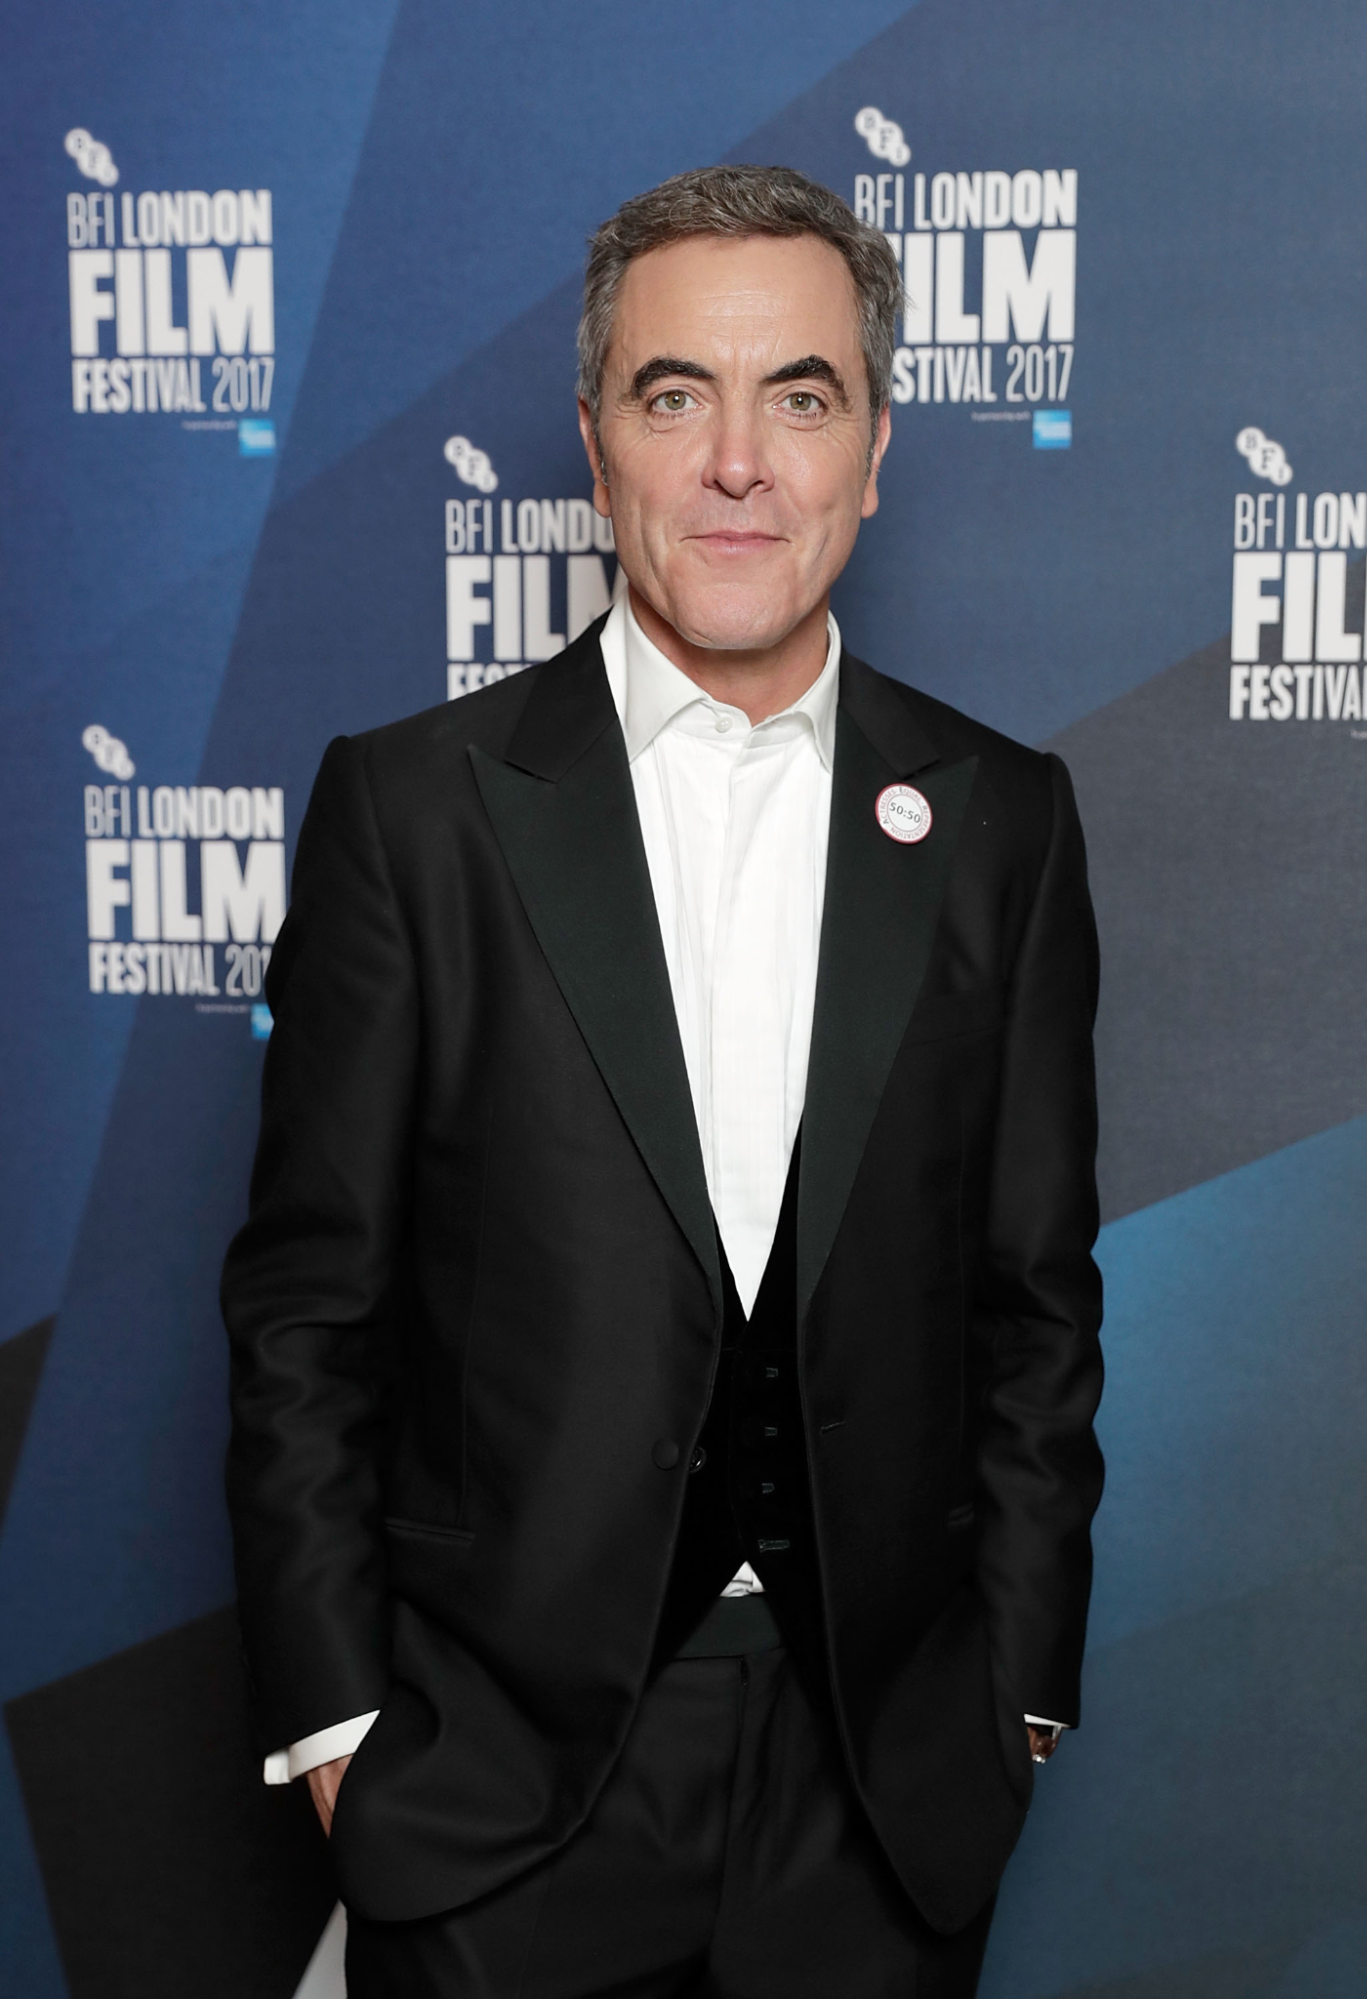 James Nesbitt Hair Transplant: Everything You Need to Know, Wimpole Clinic